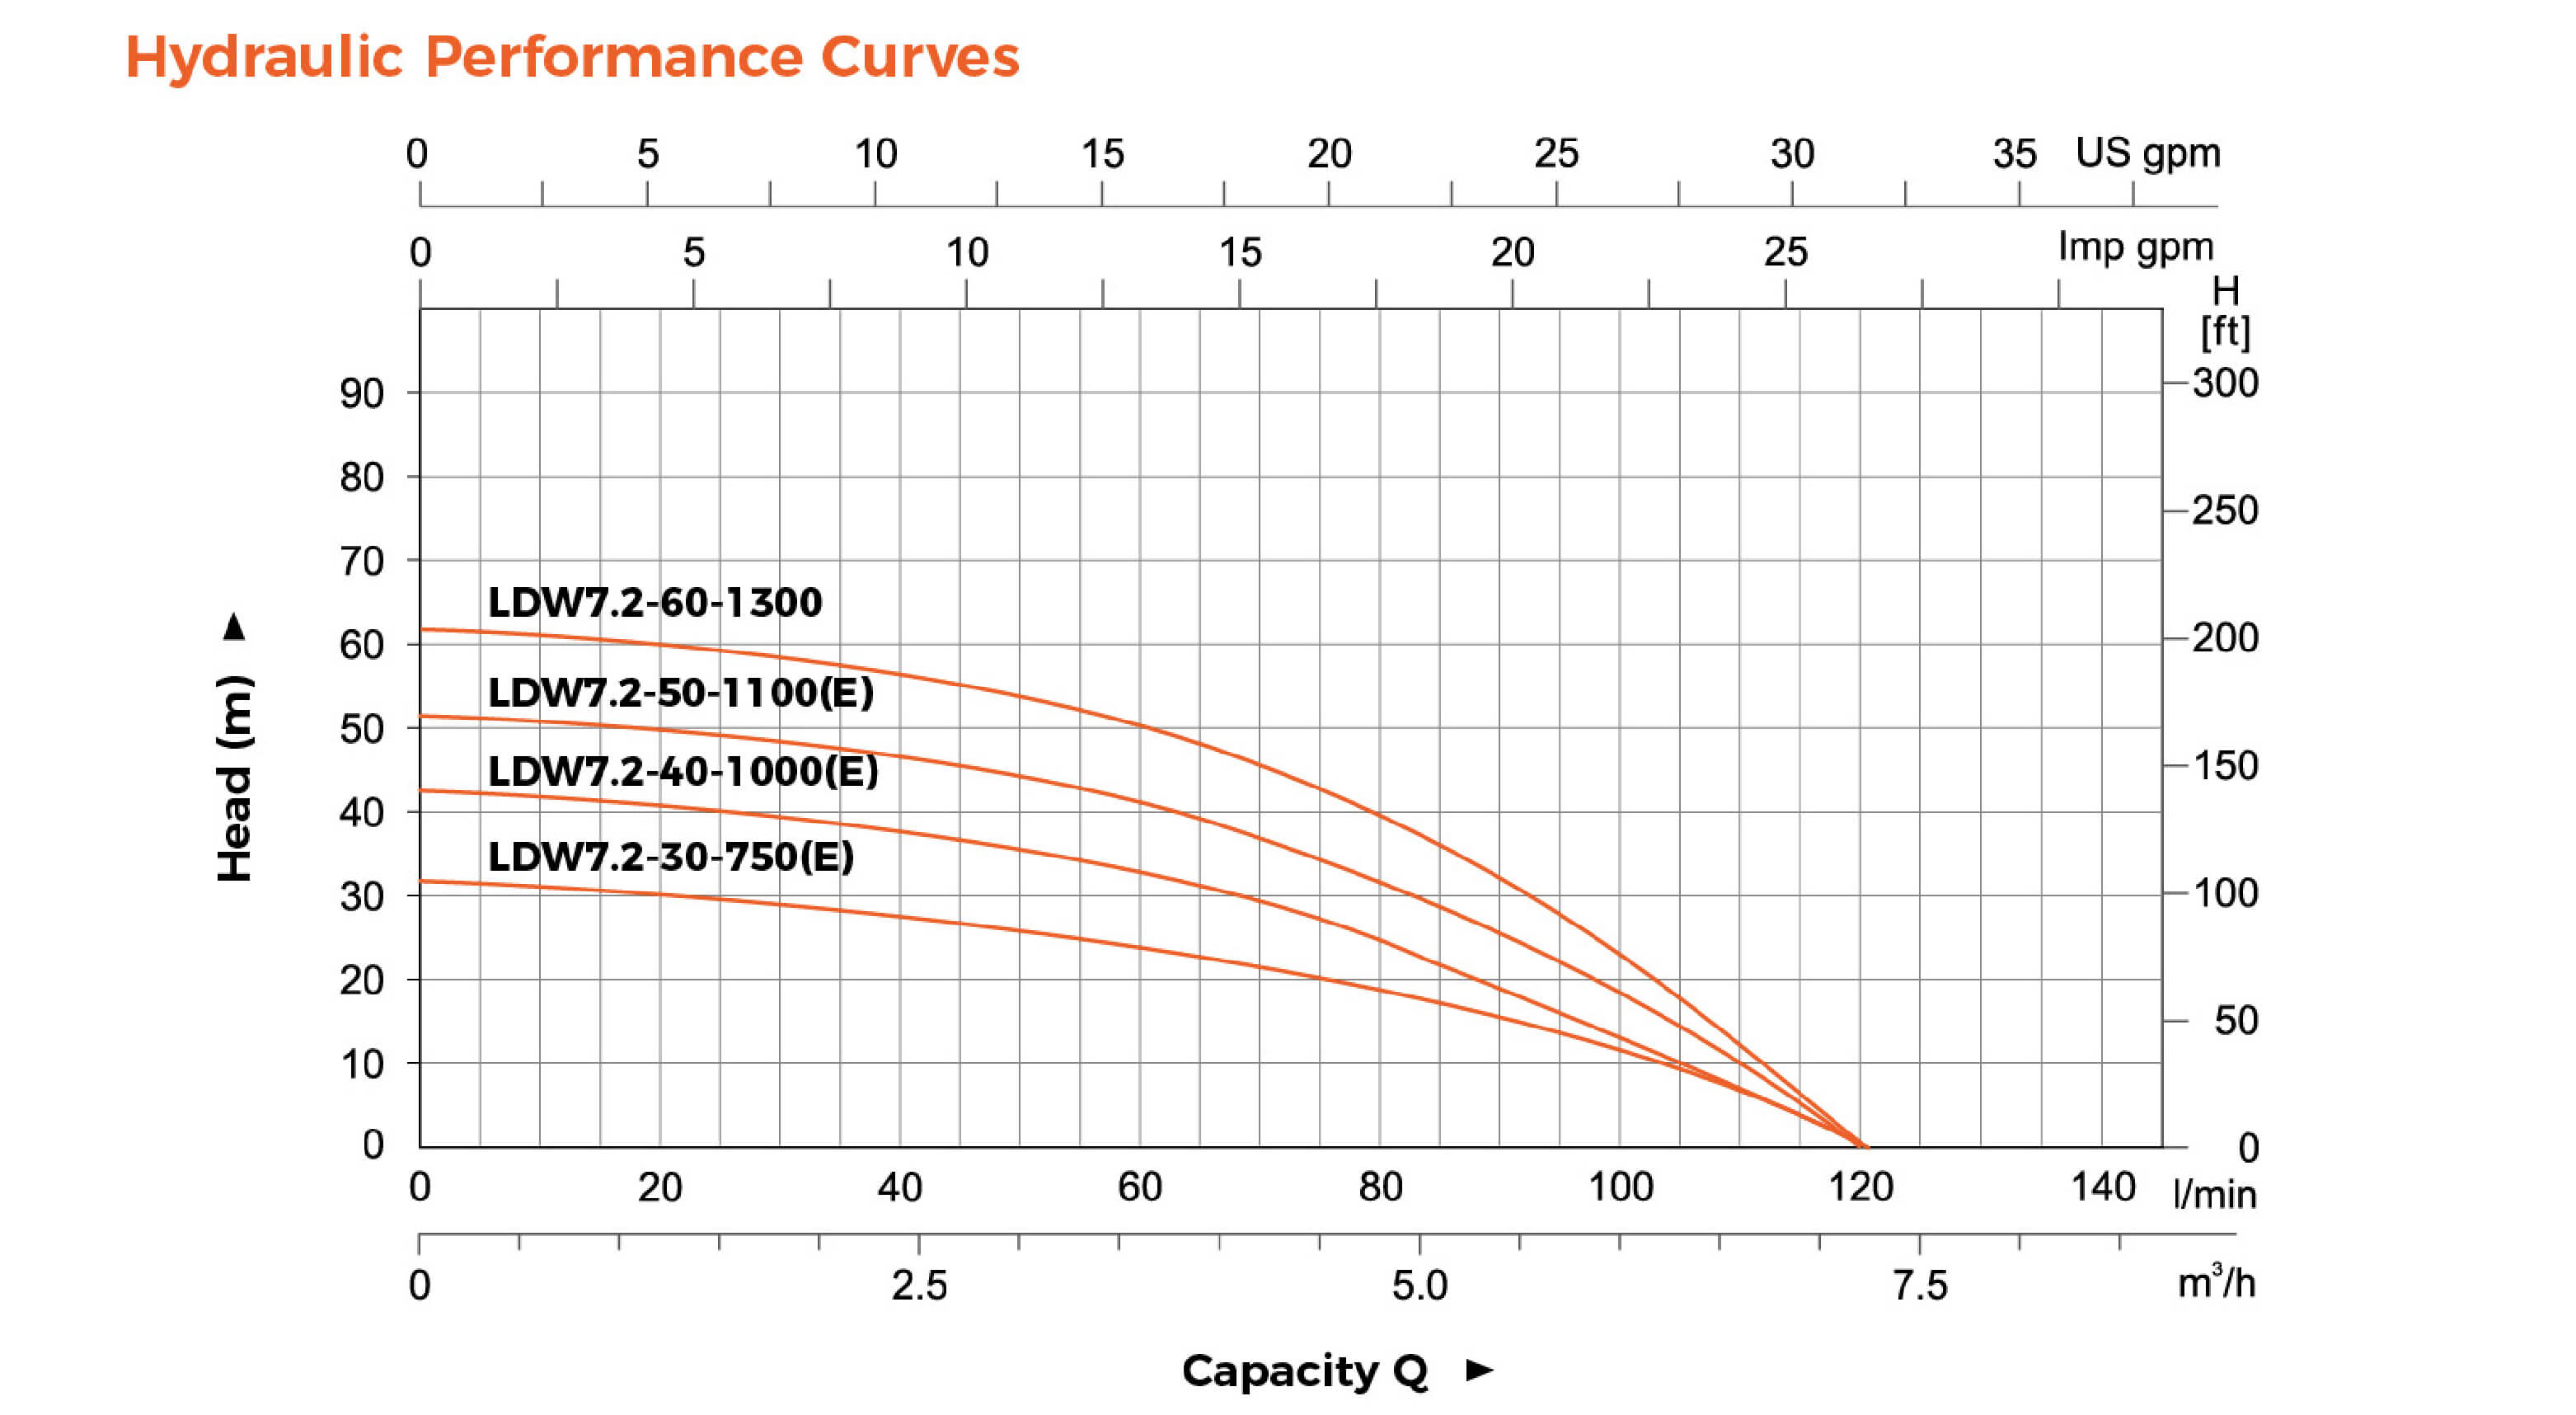 LDW High Pressure Submersible Pump Hydraulic Performance Curves